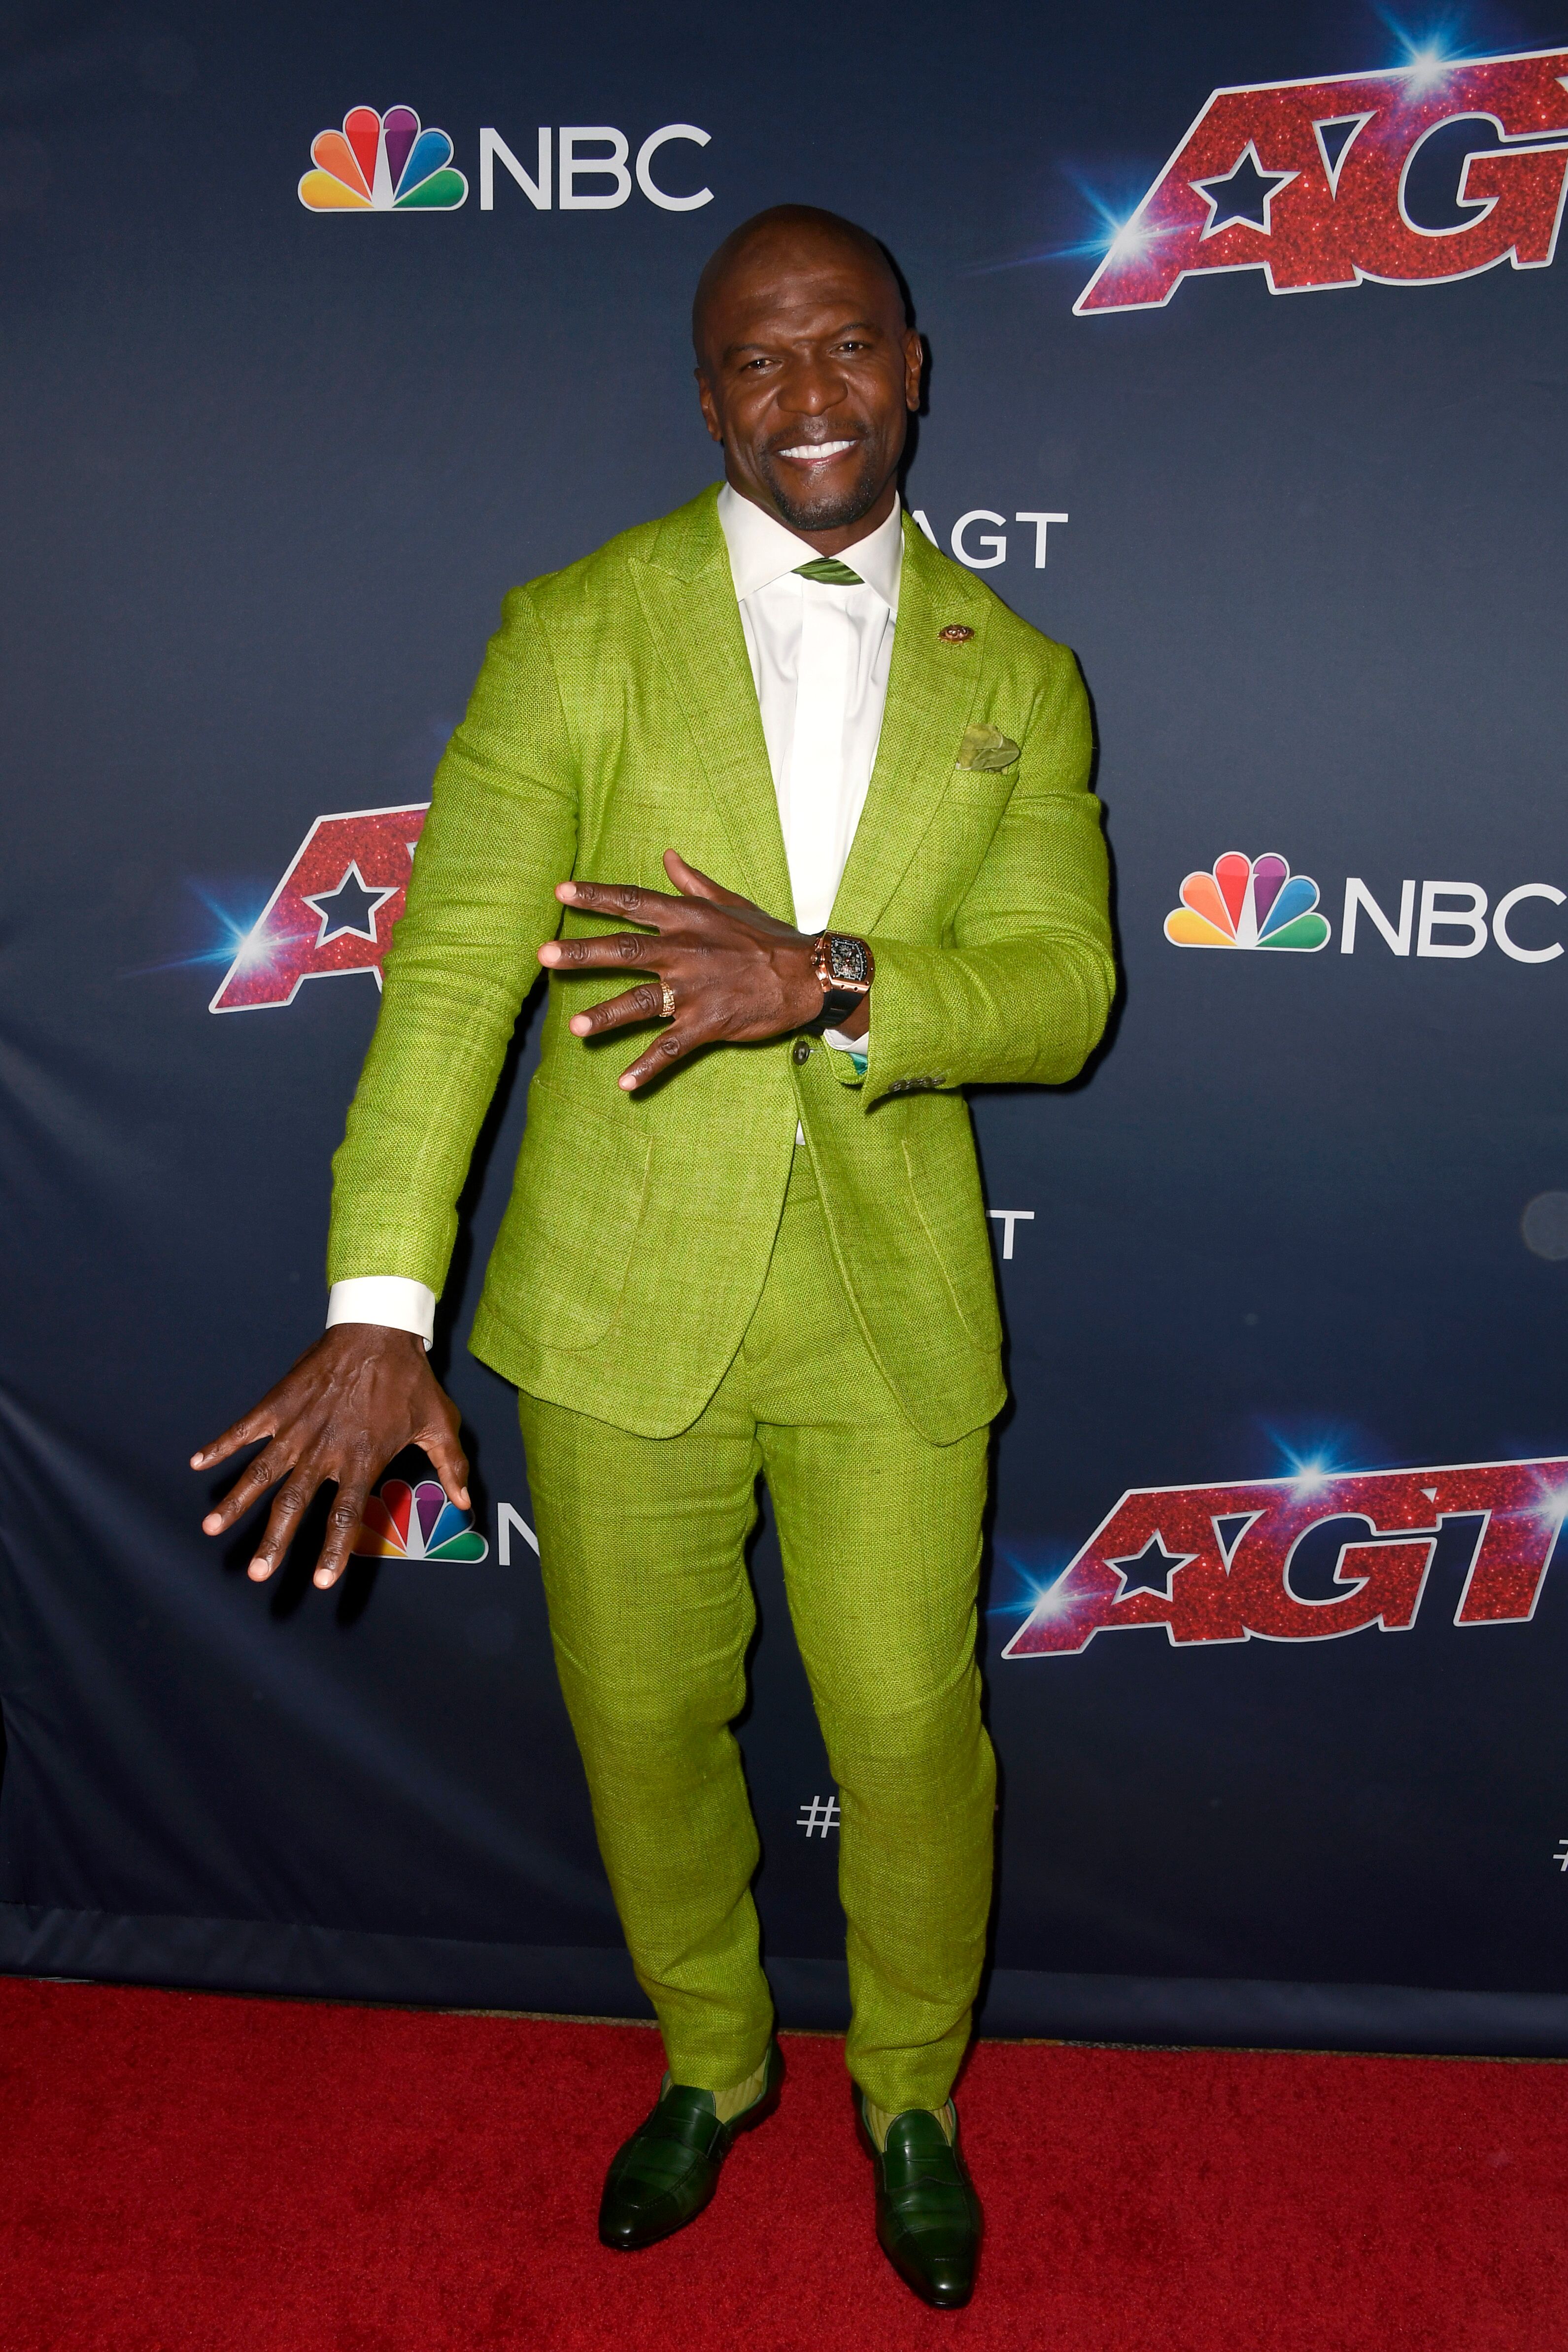 Terry Crews arrives at the "America's Got Talent" Season 14 Live Show at Dolby Theatre on August 13, 2019 in Hollywood, California. | Source: Getty Images